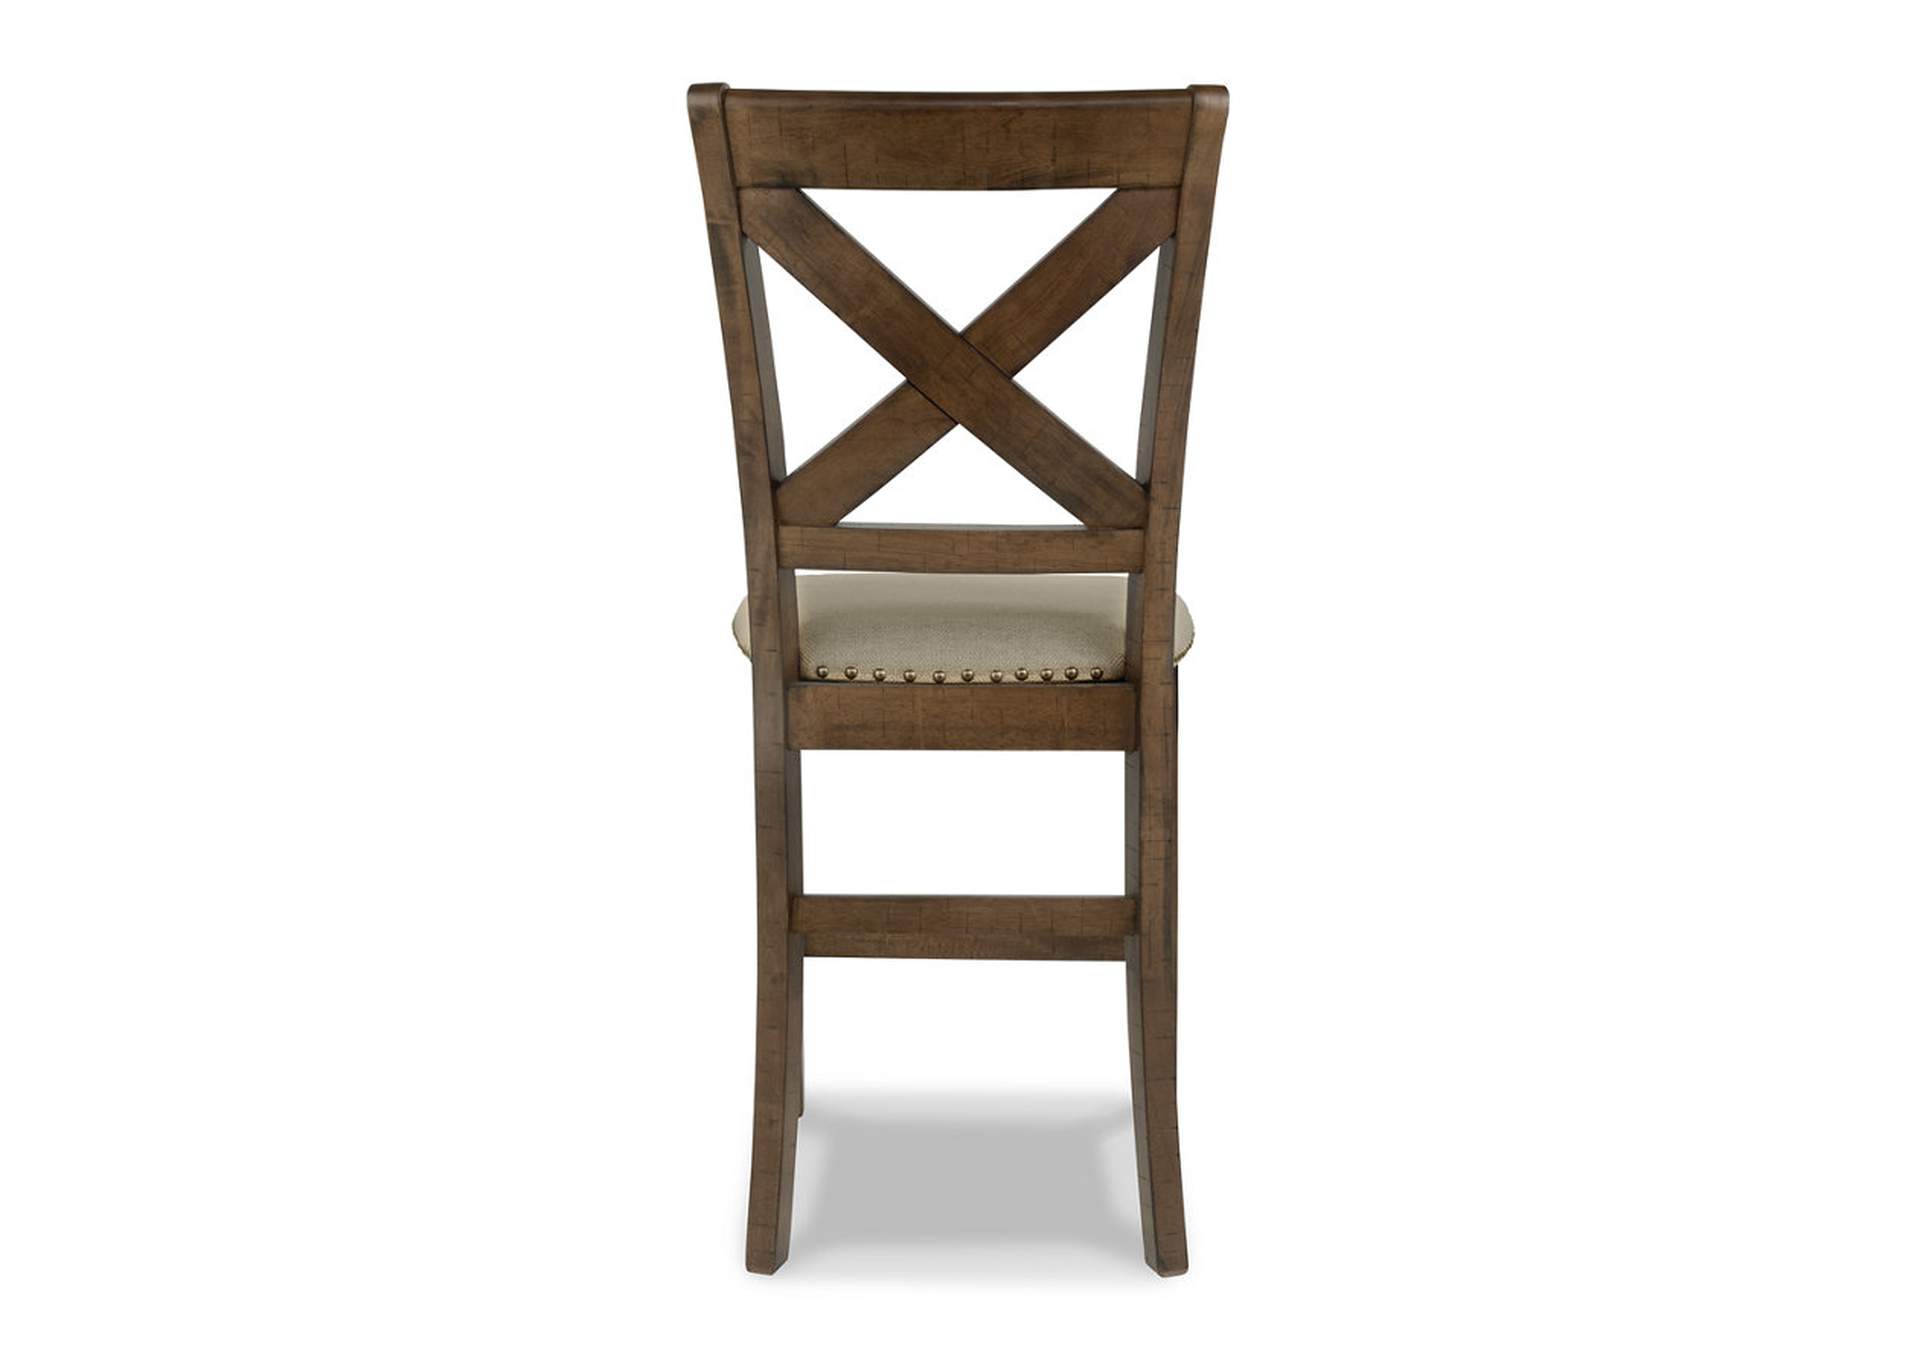 Moriville Counter Height Bar Stool,Signature Design By Ashley